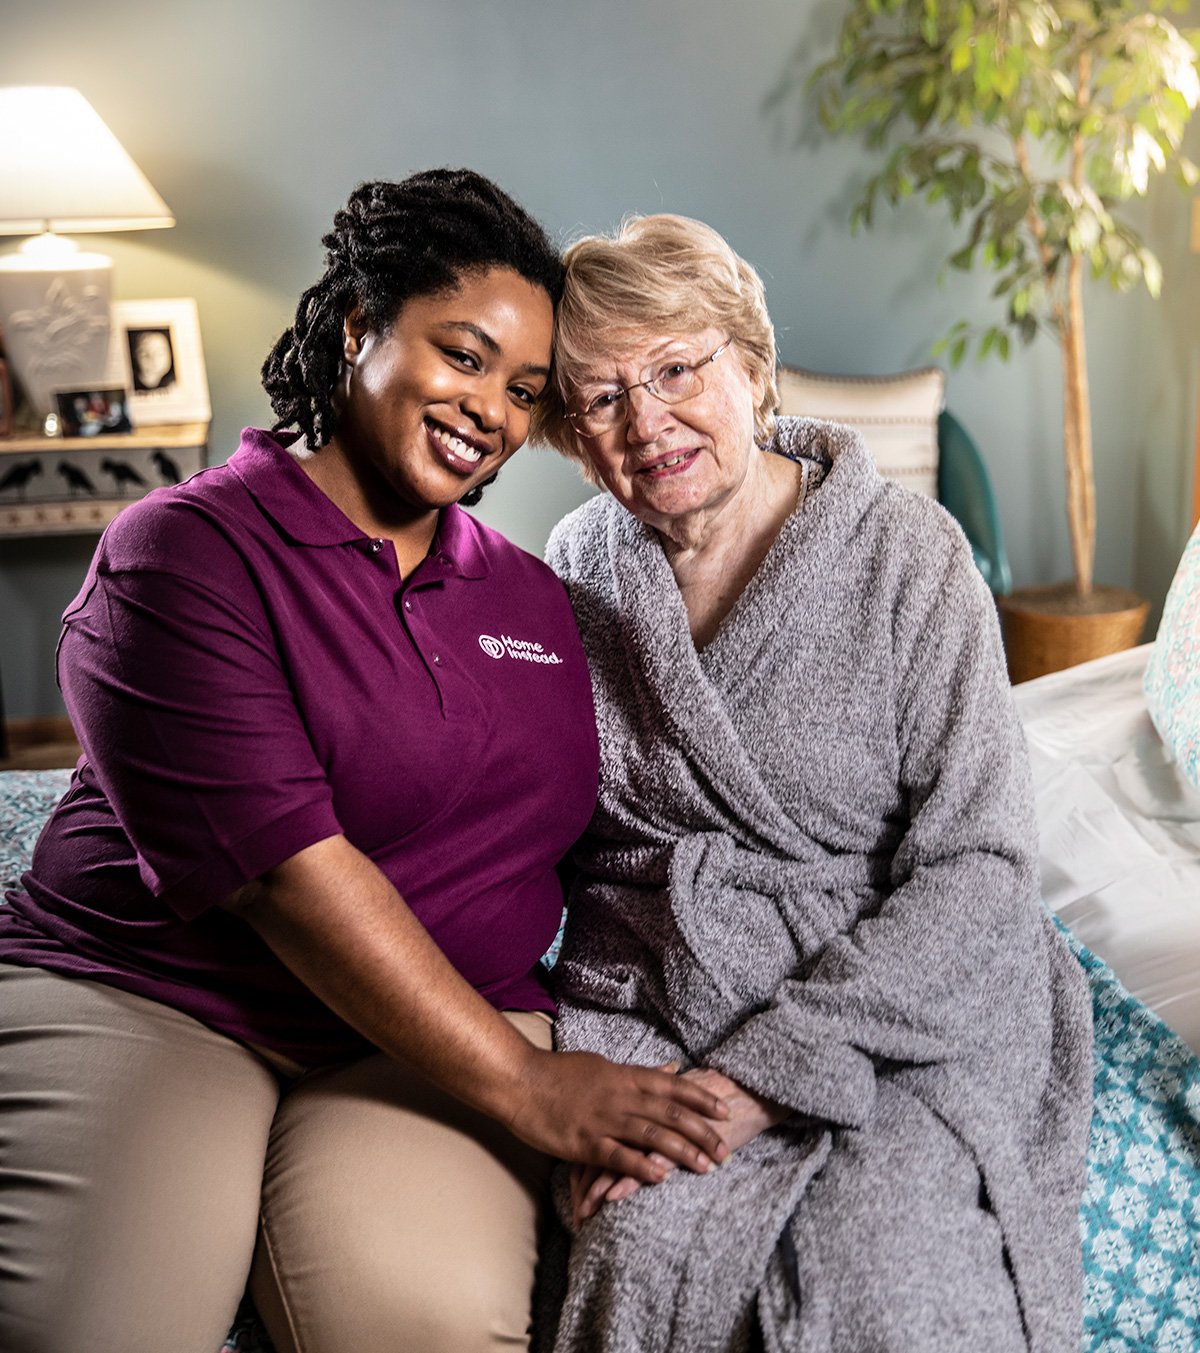 Home Instead Caregiver sitting on bed smiling with senior woman